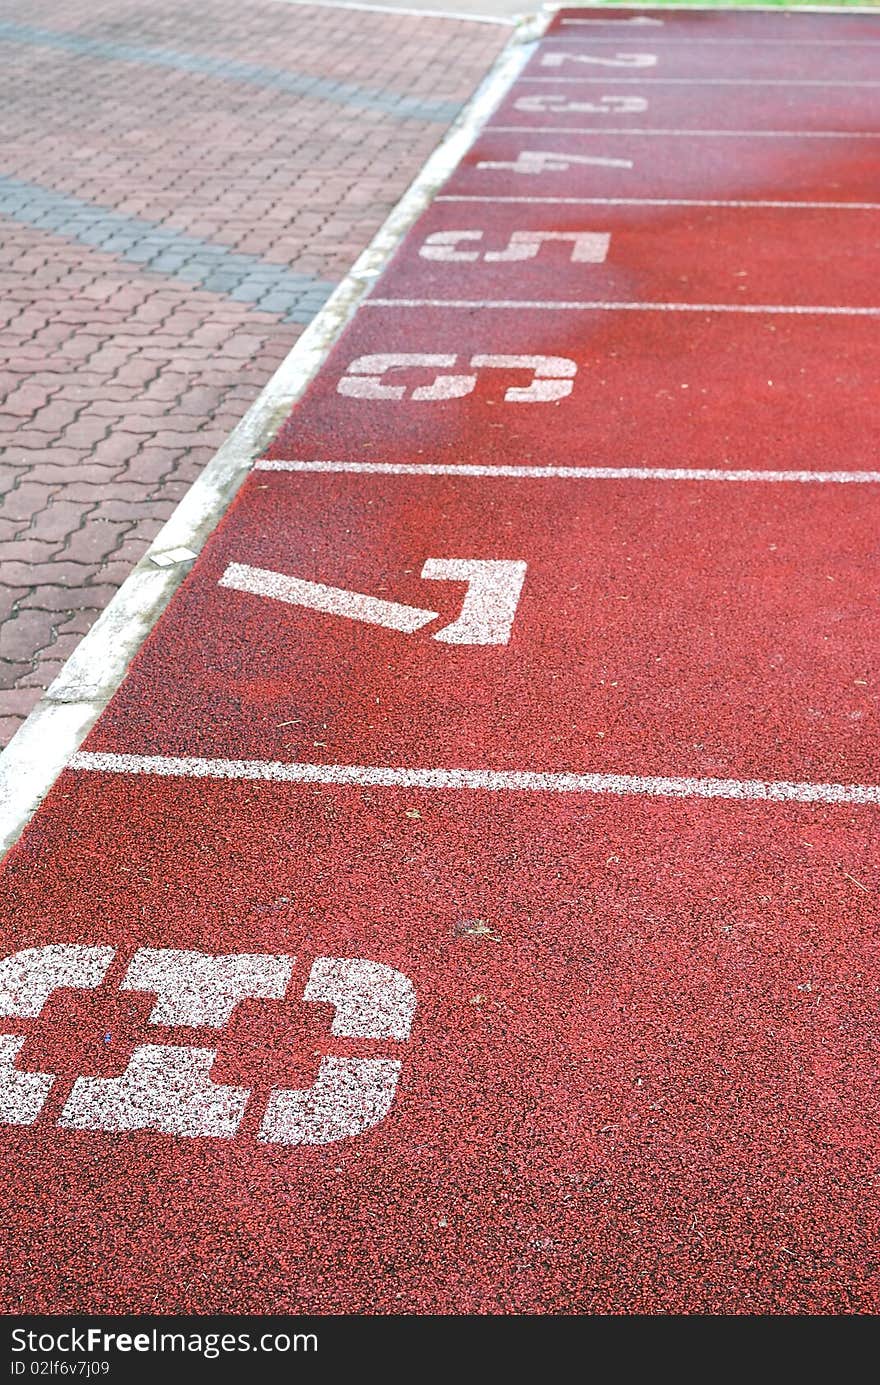 Numbered running track at the stadium. For sports and exercise, dieting and slimming, and healthy lifestyle concepts.